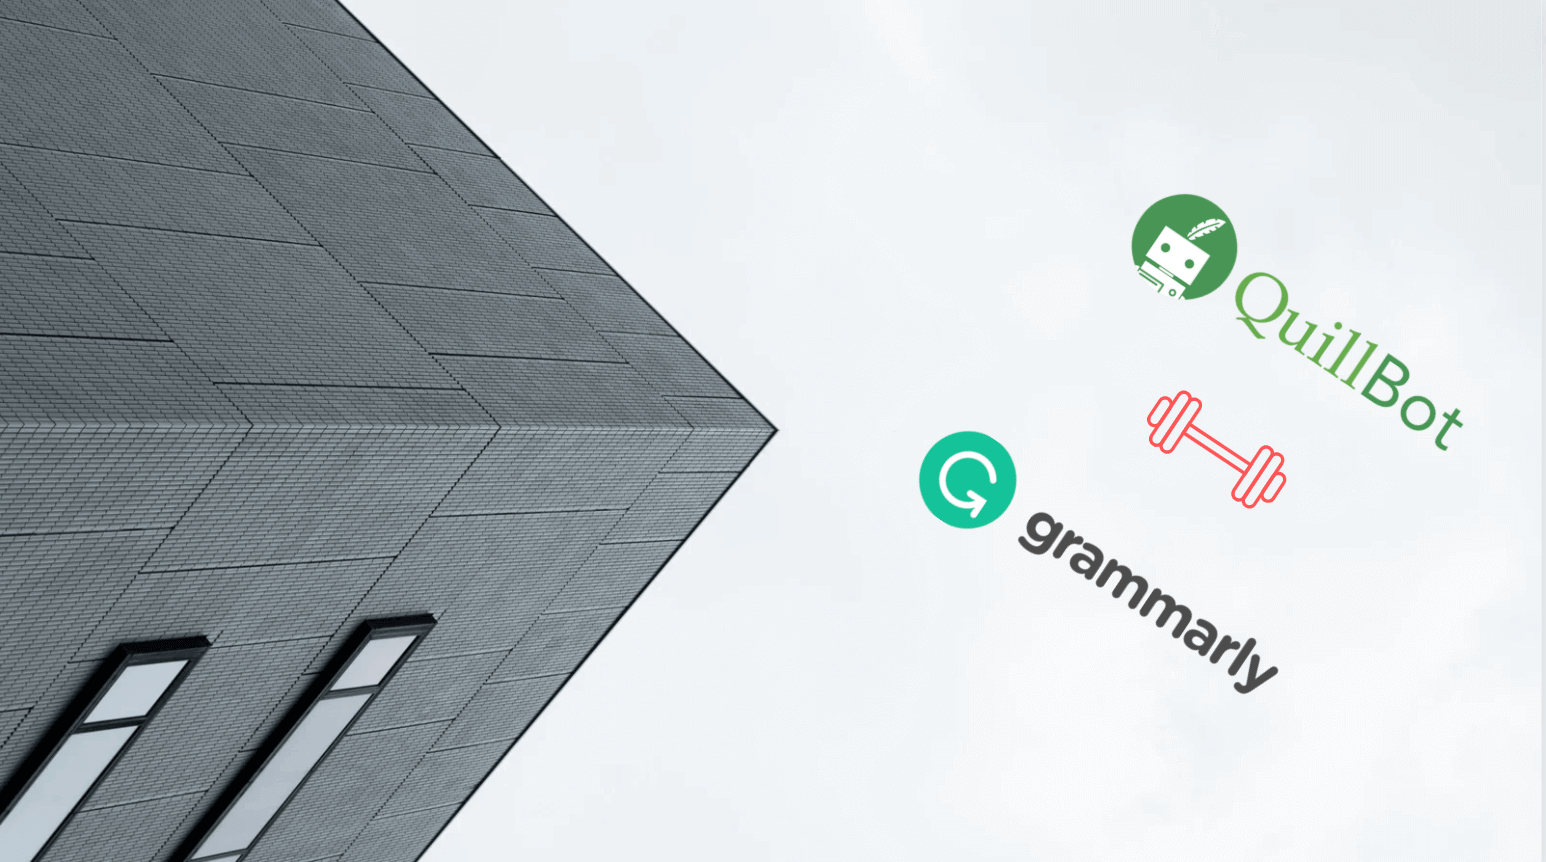 Quiltbot vs Grammarly